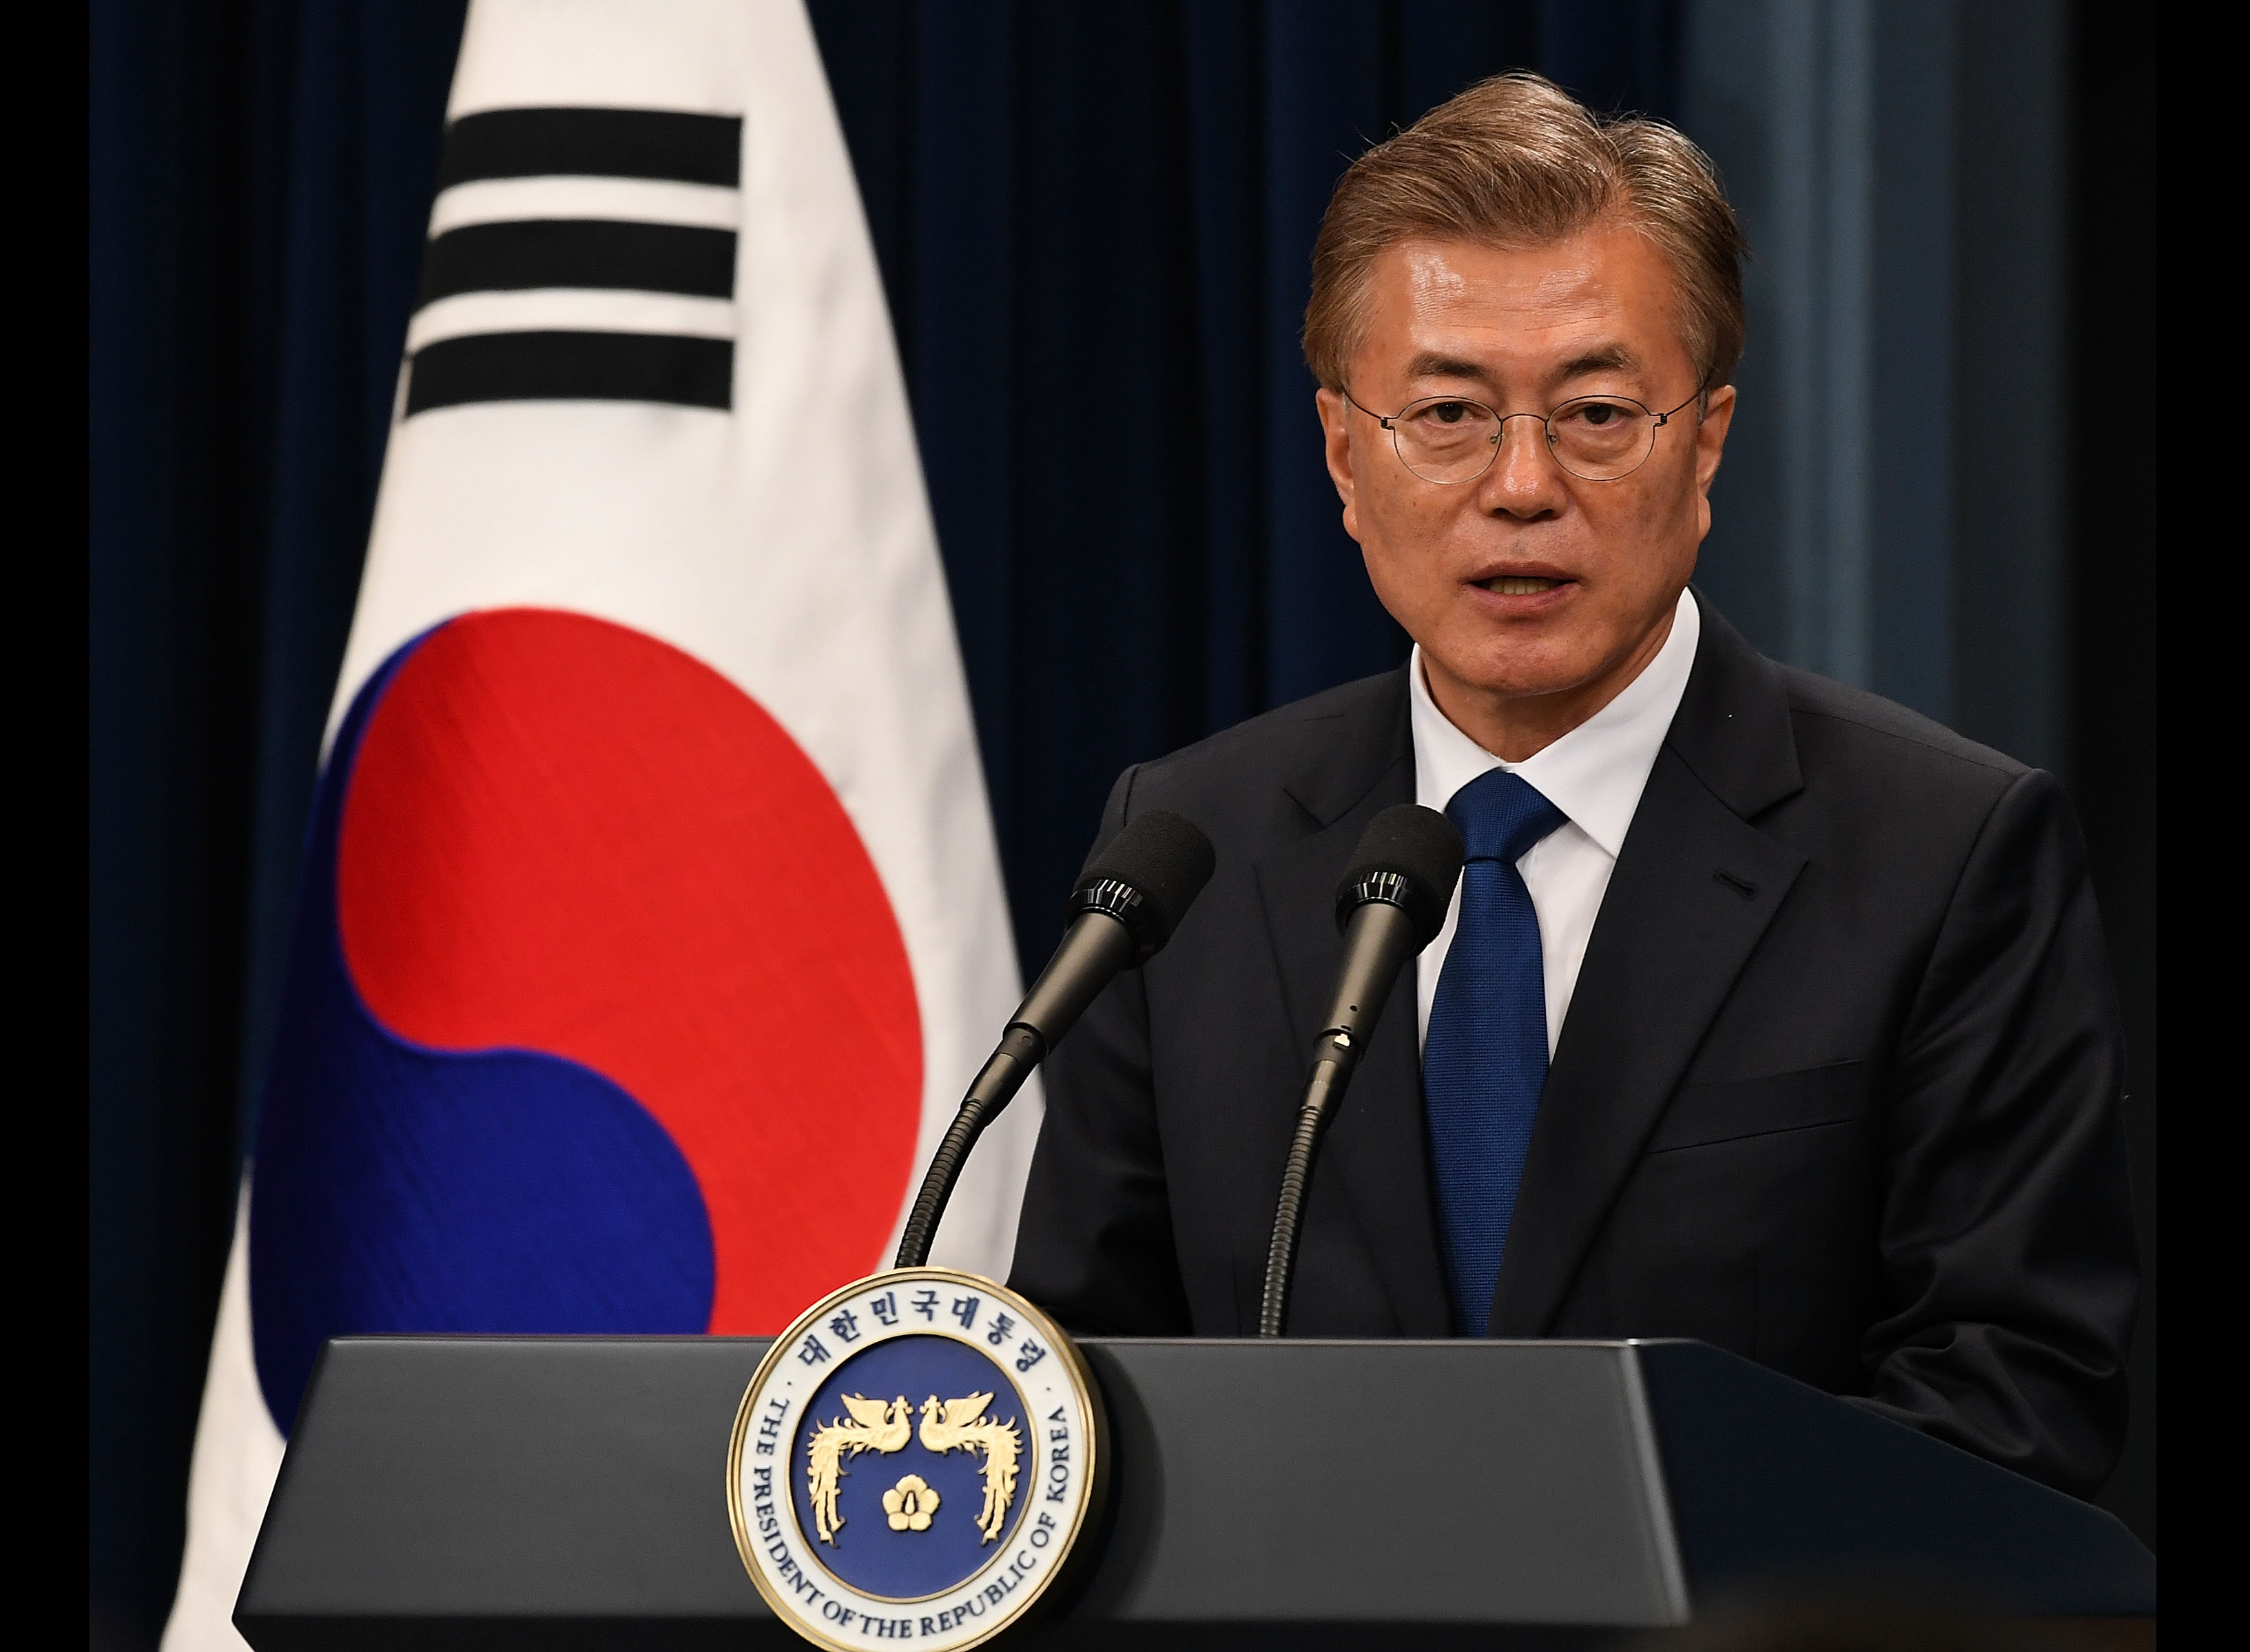 South Korea's new President Moon Jae-In speaks during a press conference at the presidential Blue House on May 10, 2017 in Seoul, South Korea. (Kim Min-Hee—Pool/Getty Images)